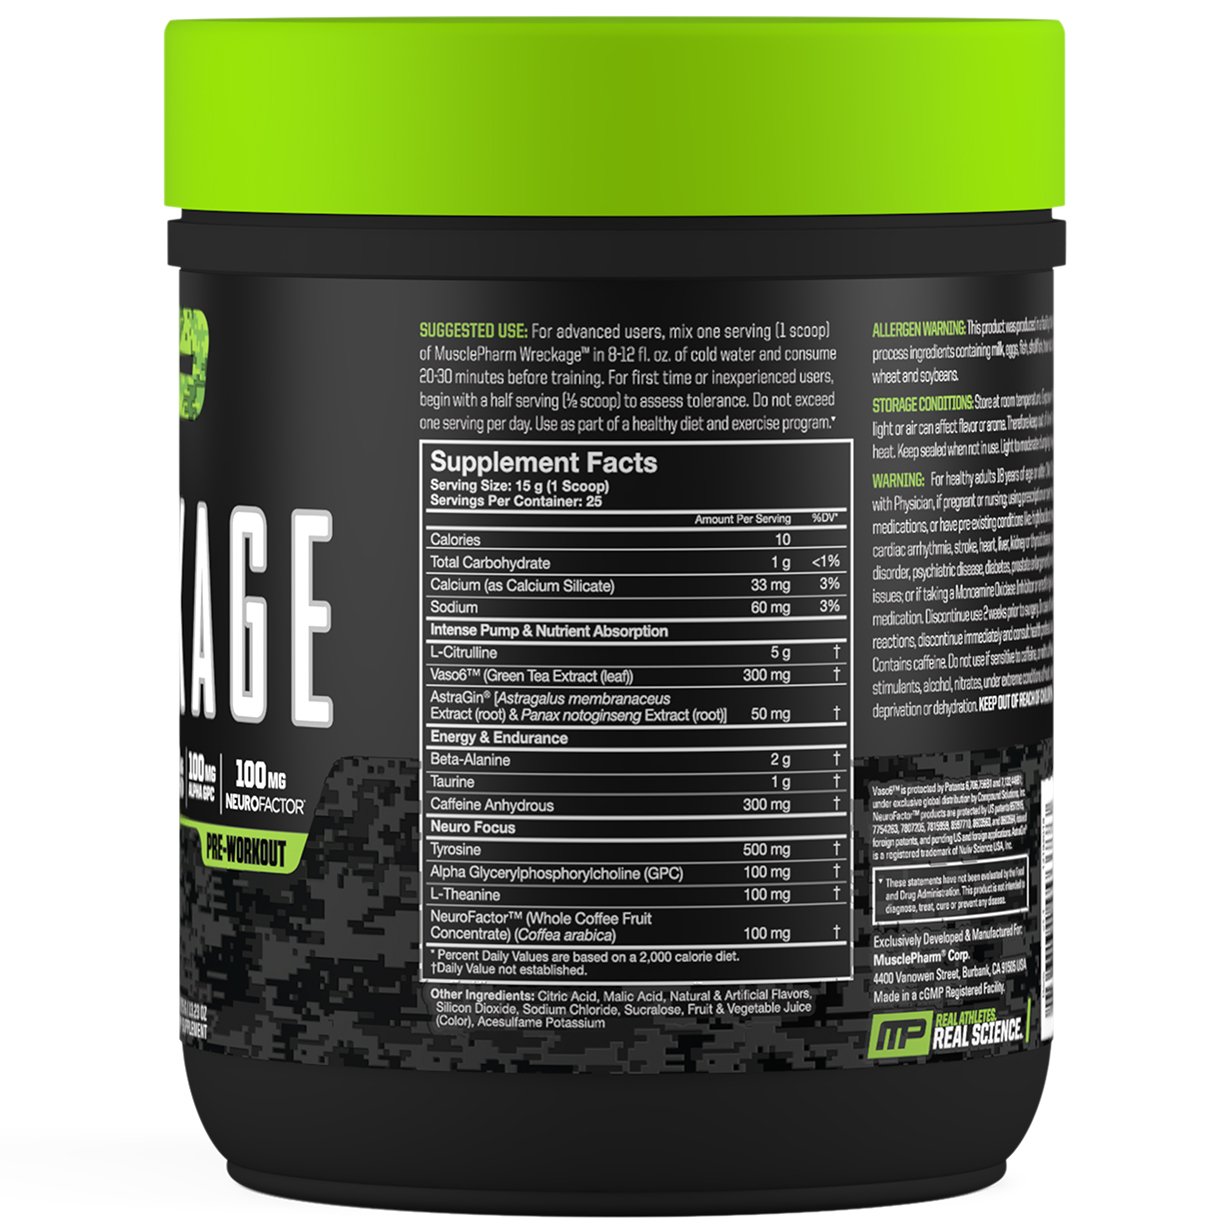 10 Minute Musclepharm pre workout wreckage with Comfort Workout Clothes